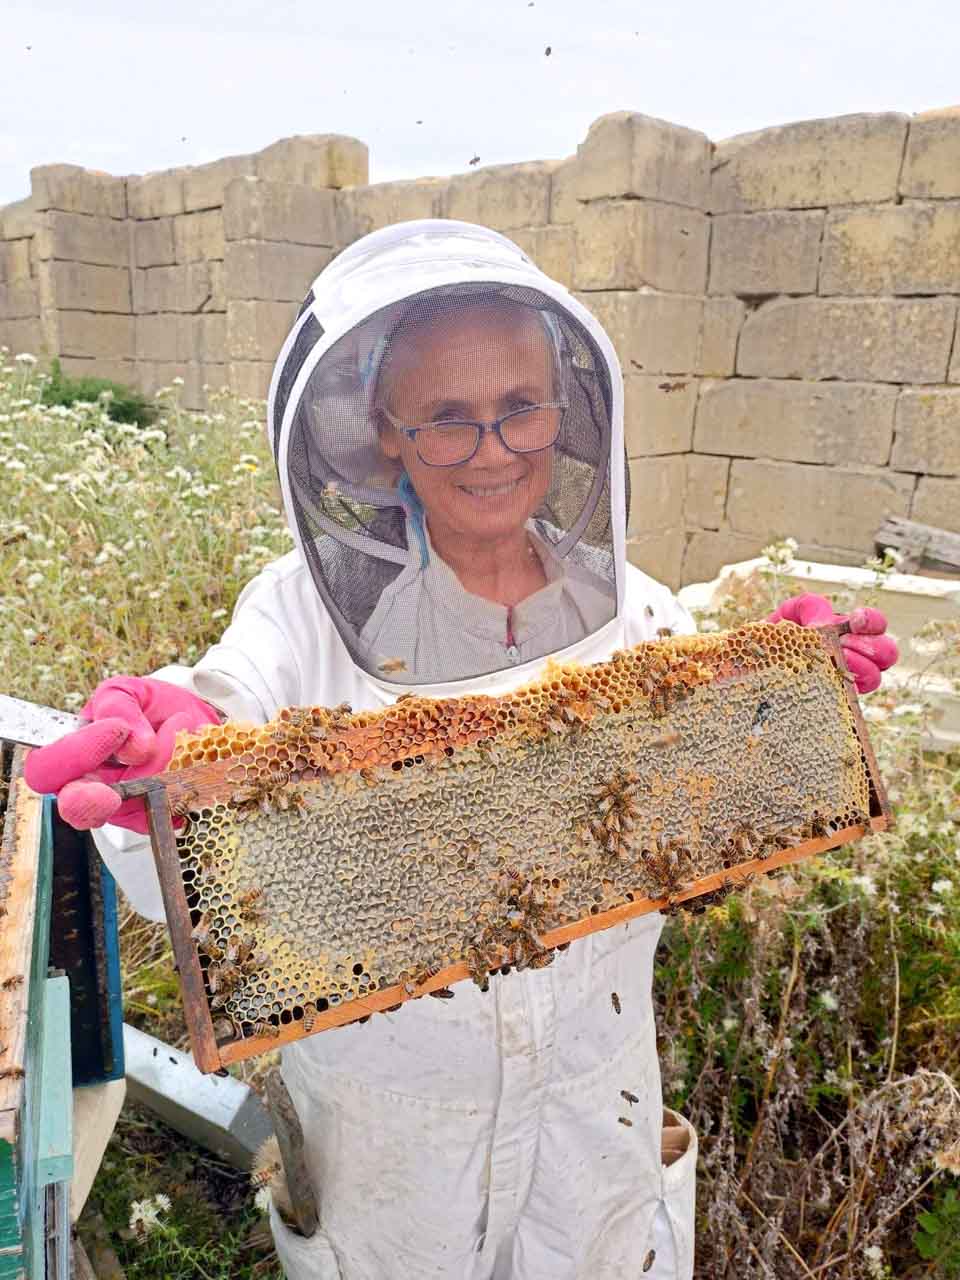 A beekeeper smiling at the camera as she is holding a hive frame with capped honey cells